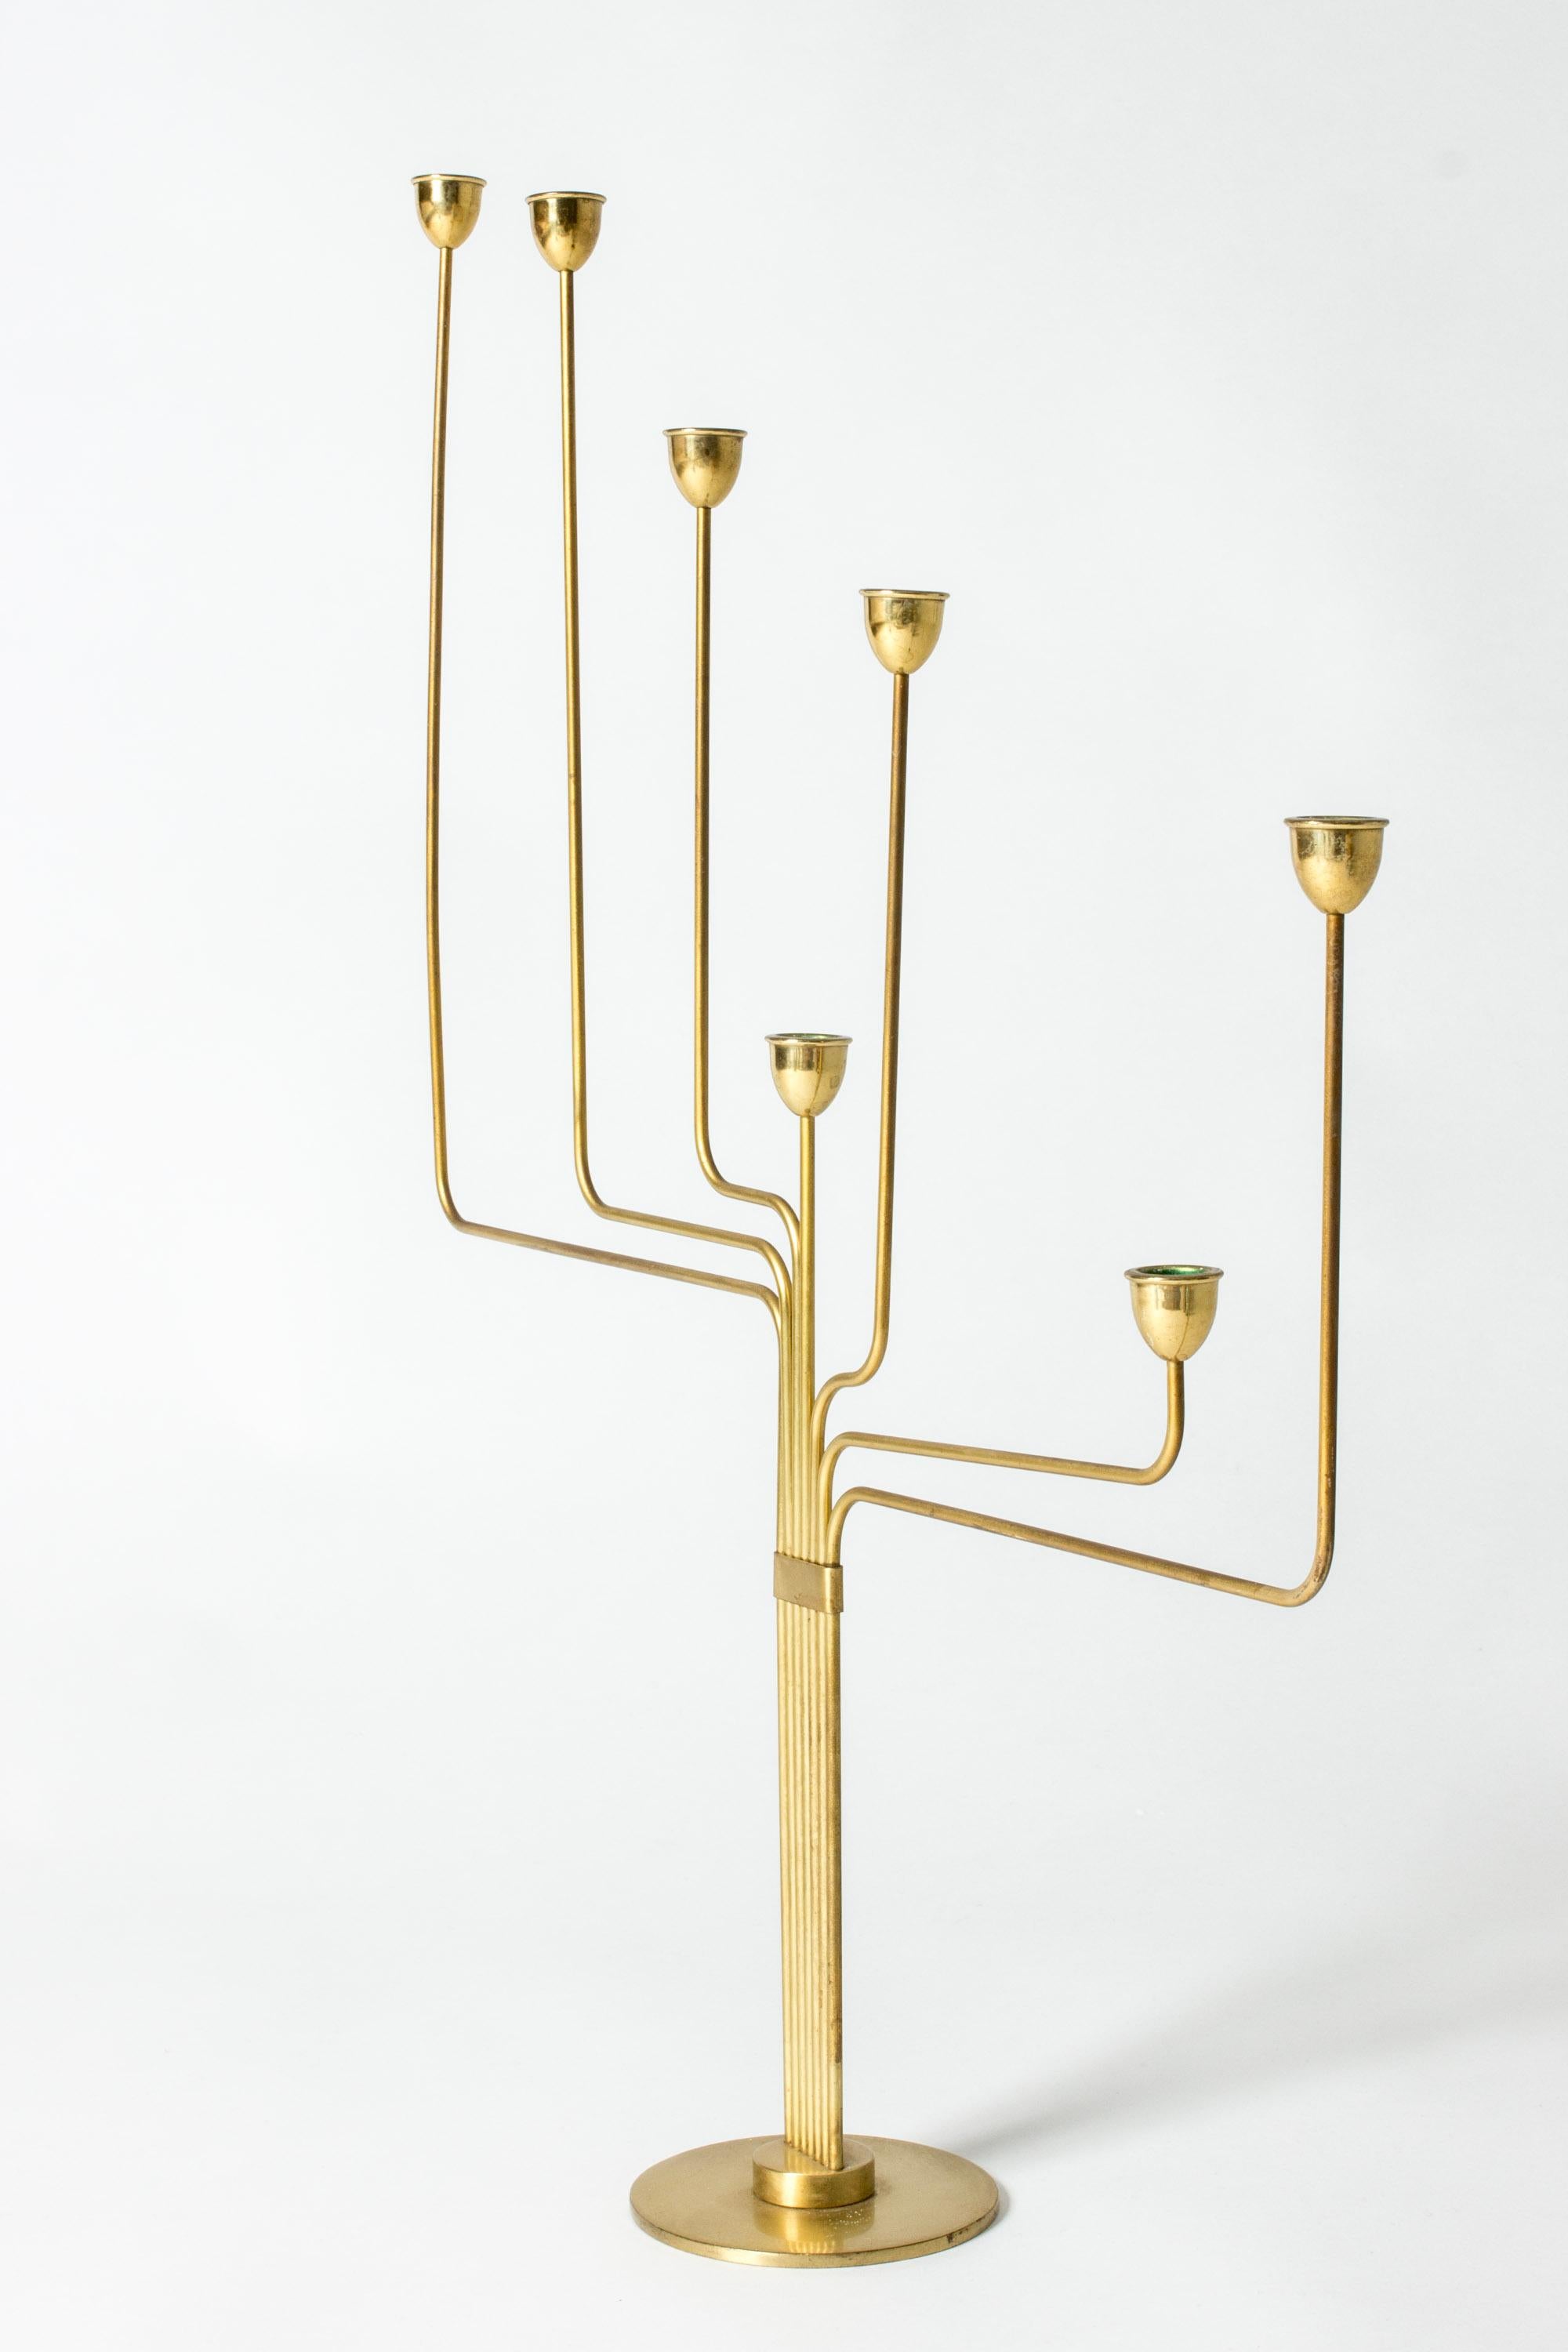 Beautiful “Ursa Major” candelabra by Piet Hein, made from brass. The position of the candleholders form the positions of the stars in the “Ursa Major” constellation.